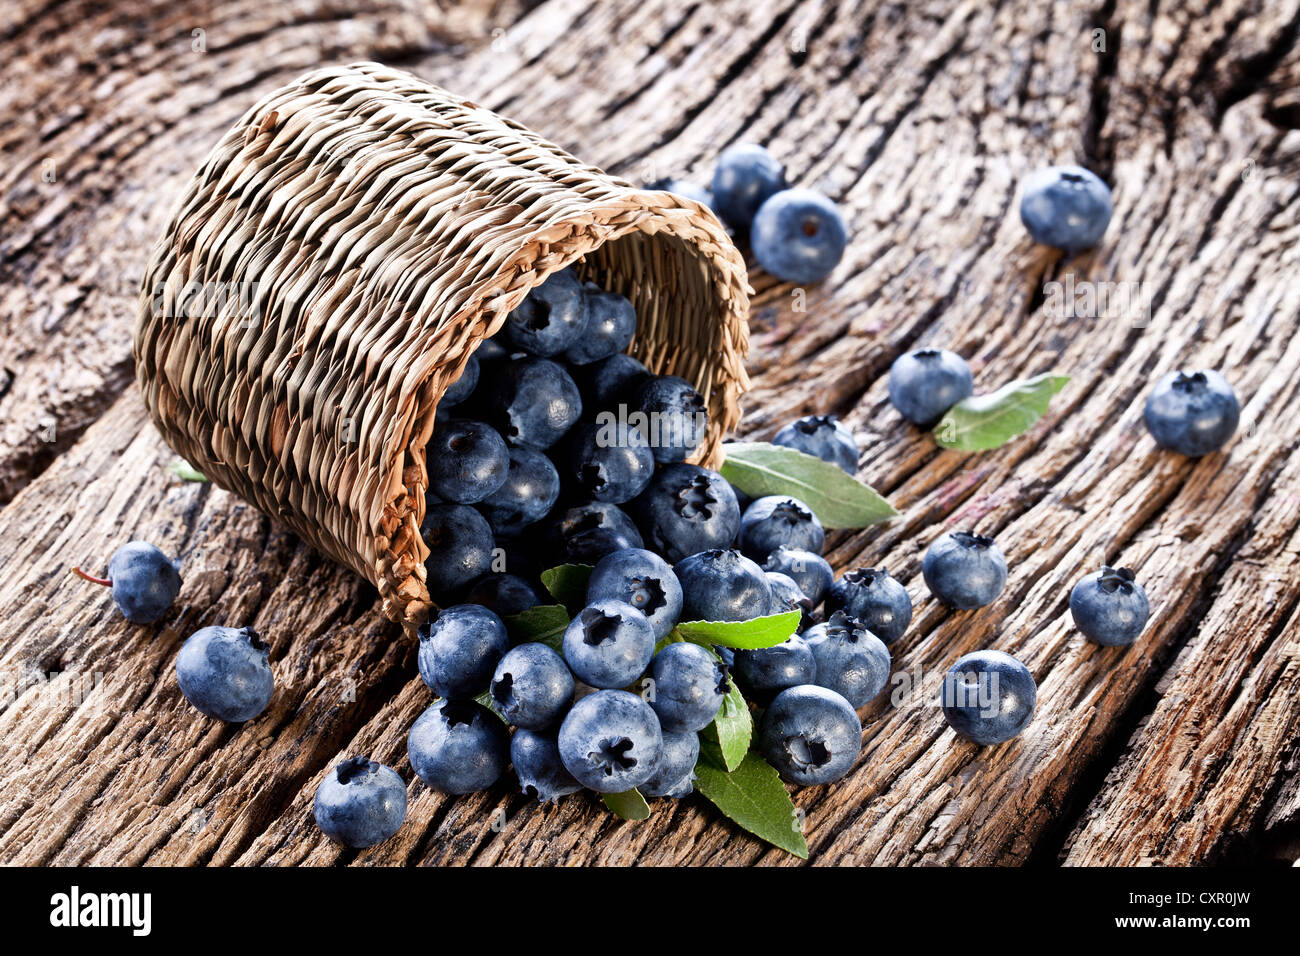 Blueberries have dropped from the basket on an old wooden table. Stock Photo